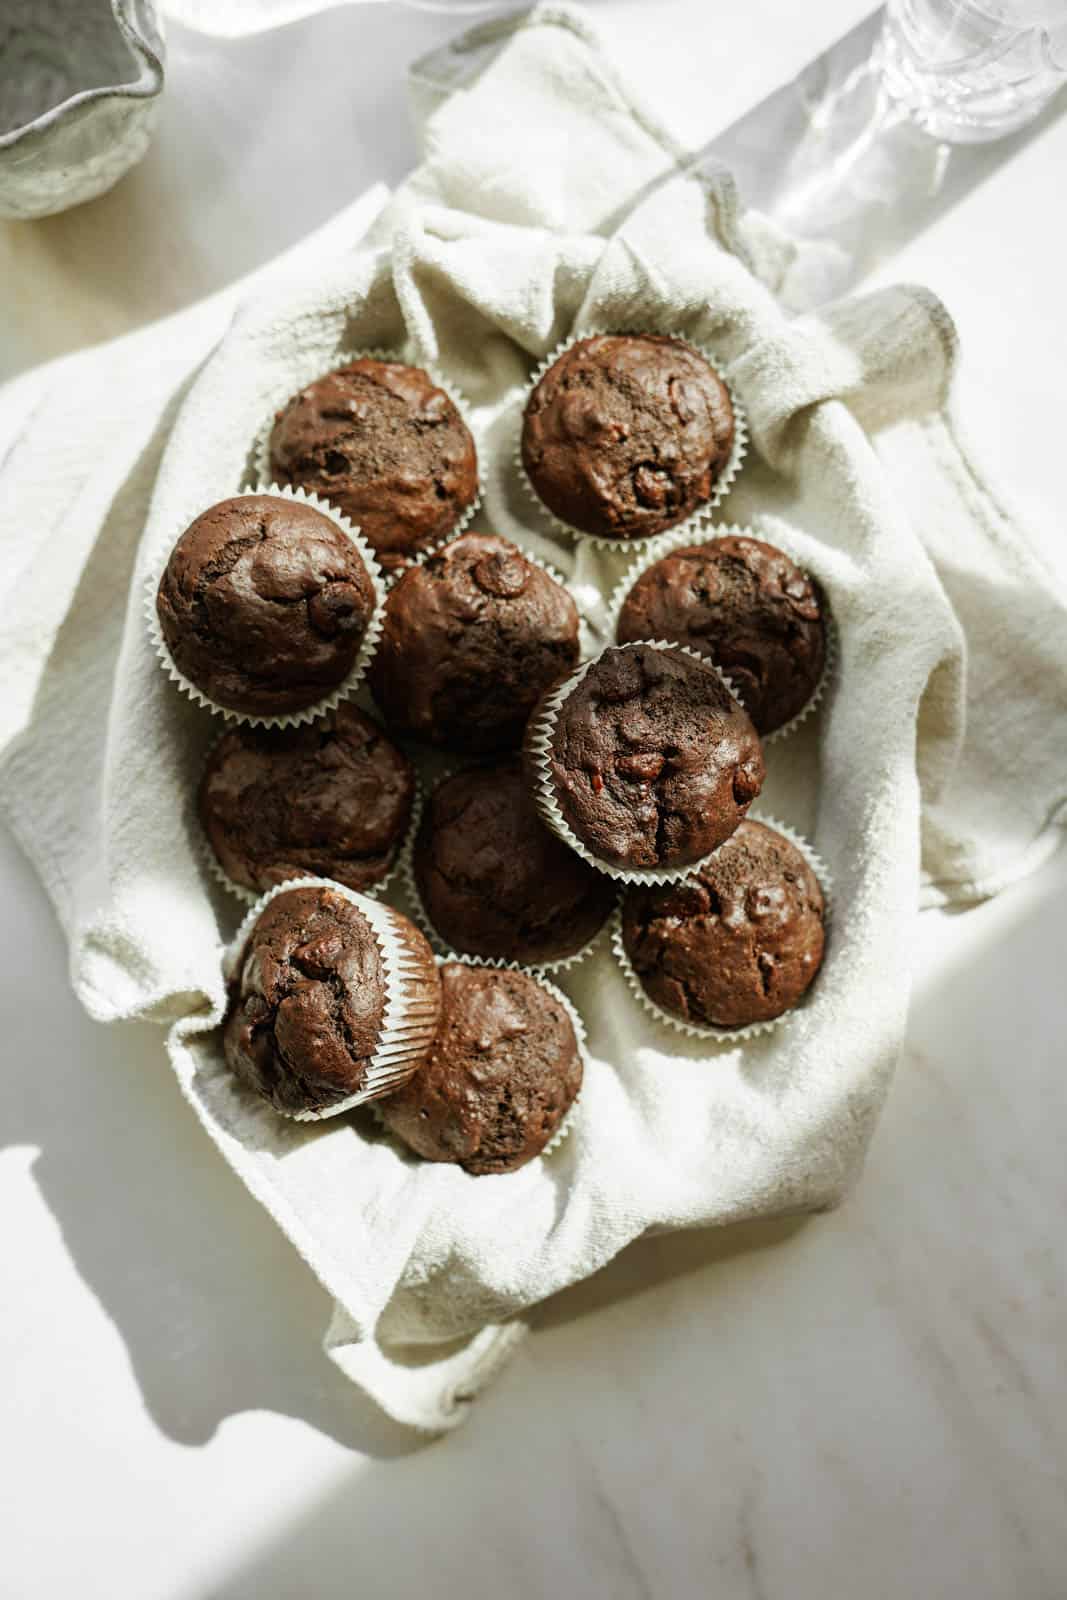 Chocolate muffins in a basket with a white napkin